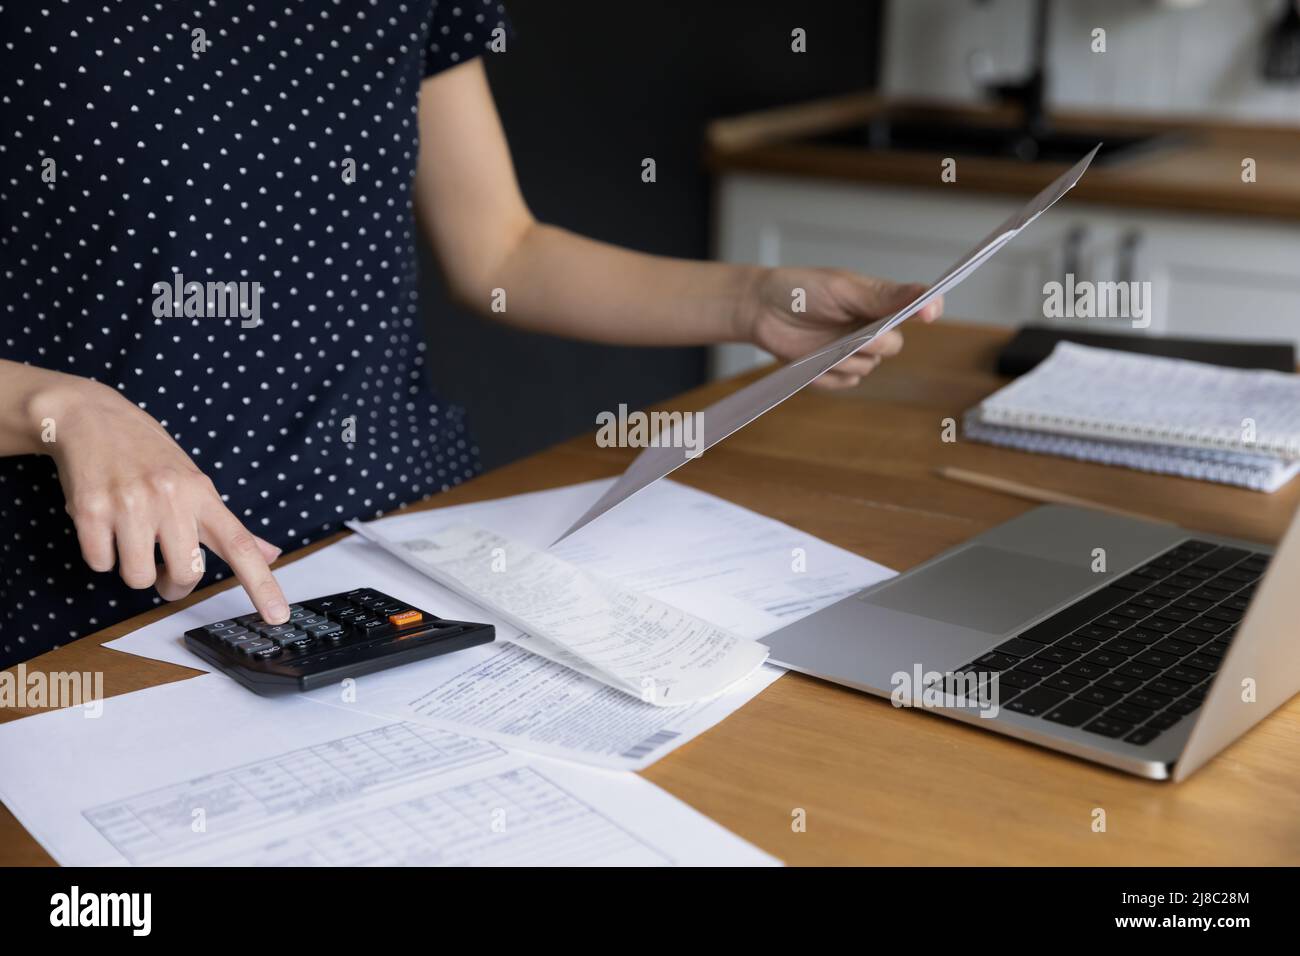 Homeowner, renter woman calculating fees, analyzing receipts Stock Photo